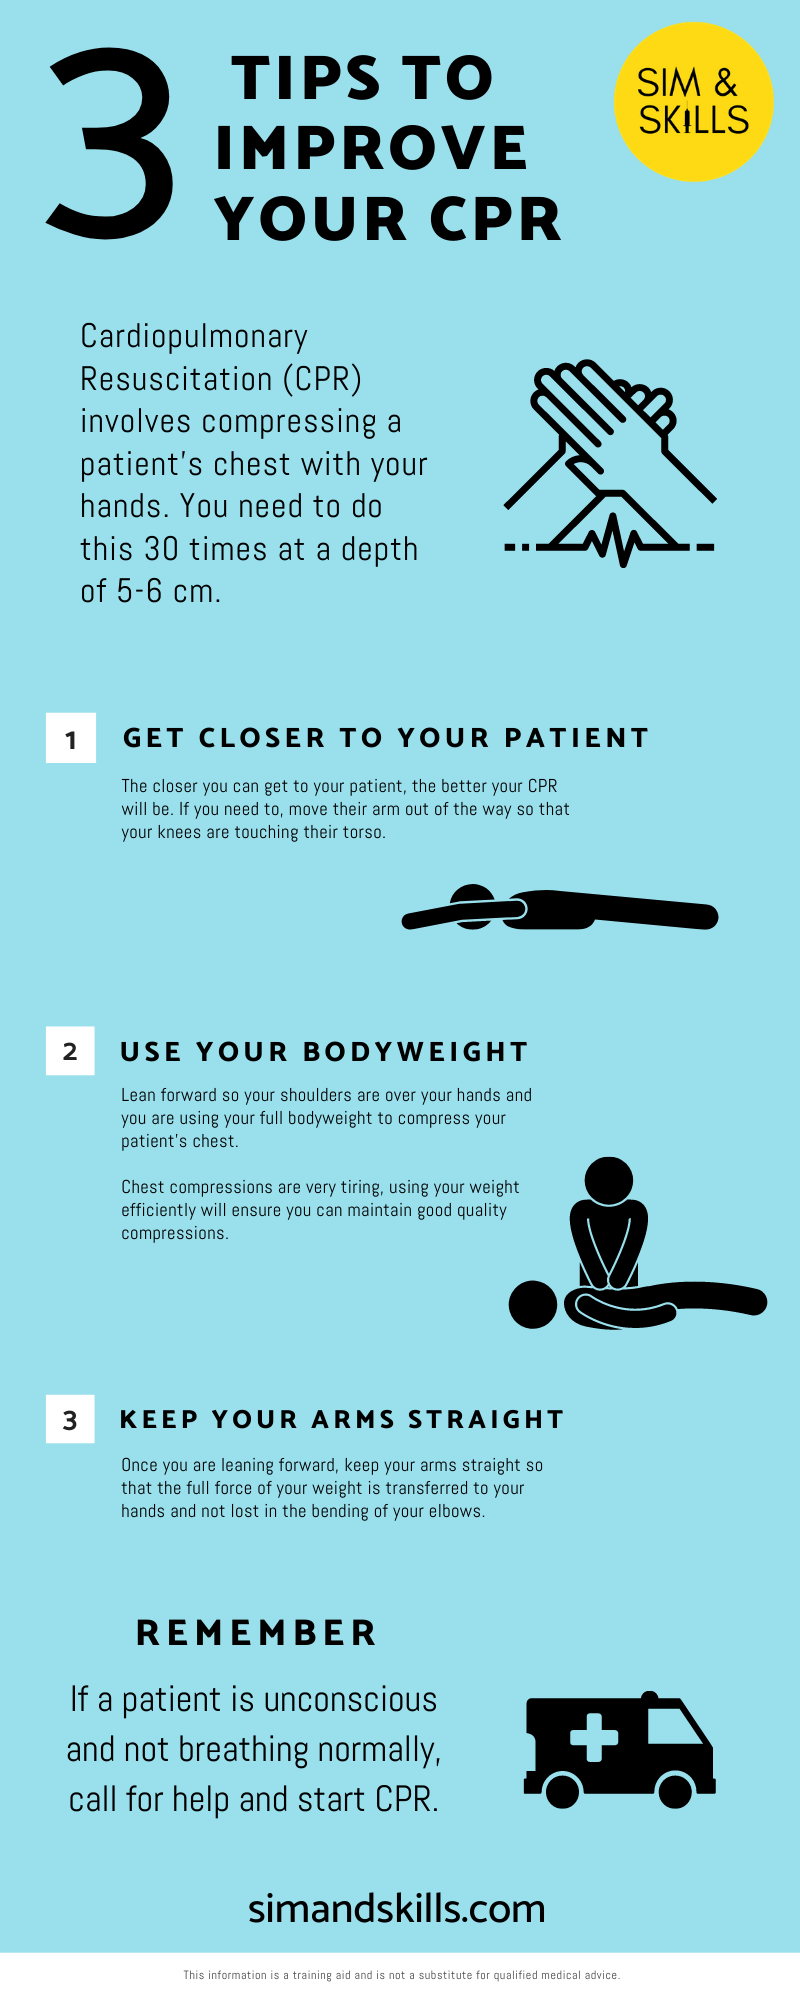 3 Tips to Improve Your CPR - Free Infographic - Sim & Skills